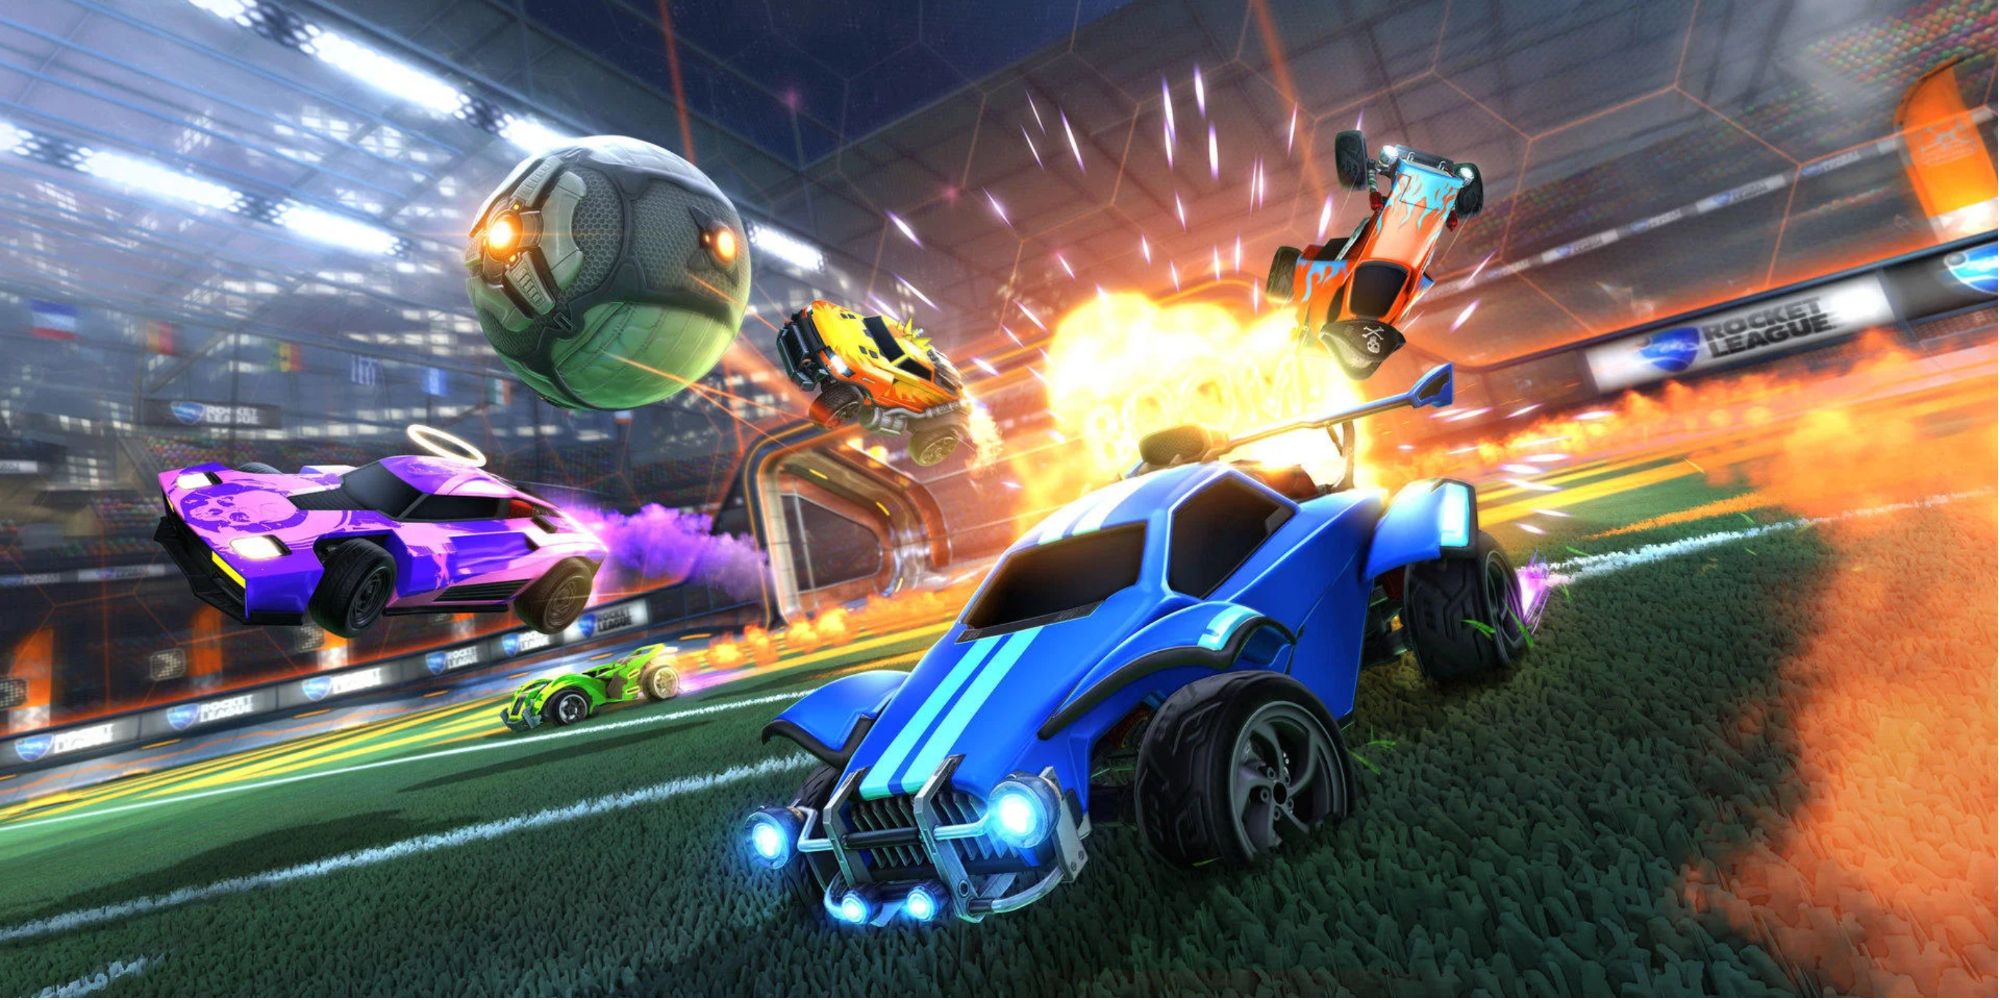 Rocket League cars duking it out over the soccer ball